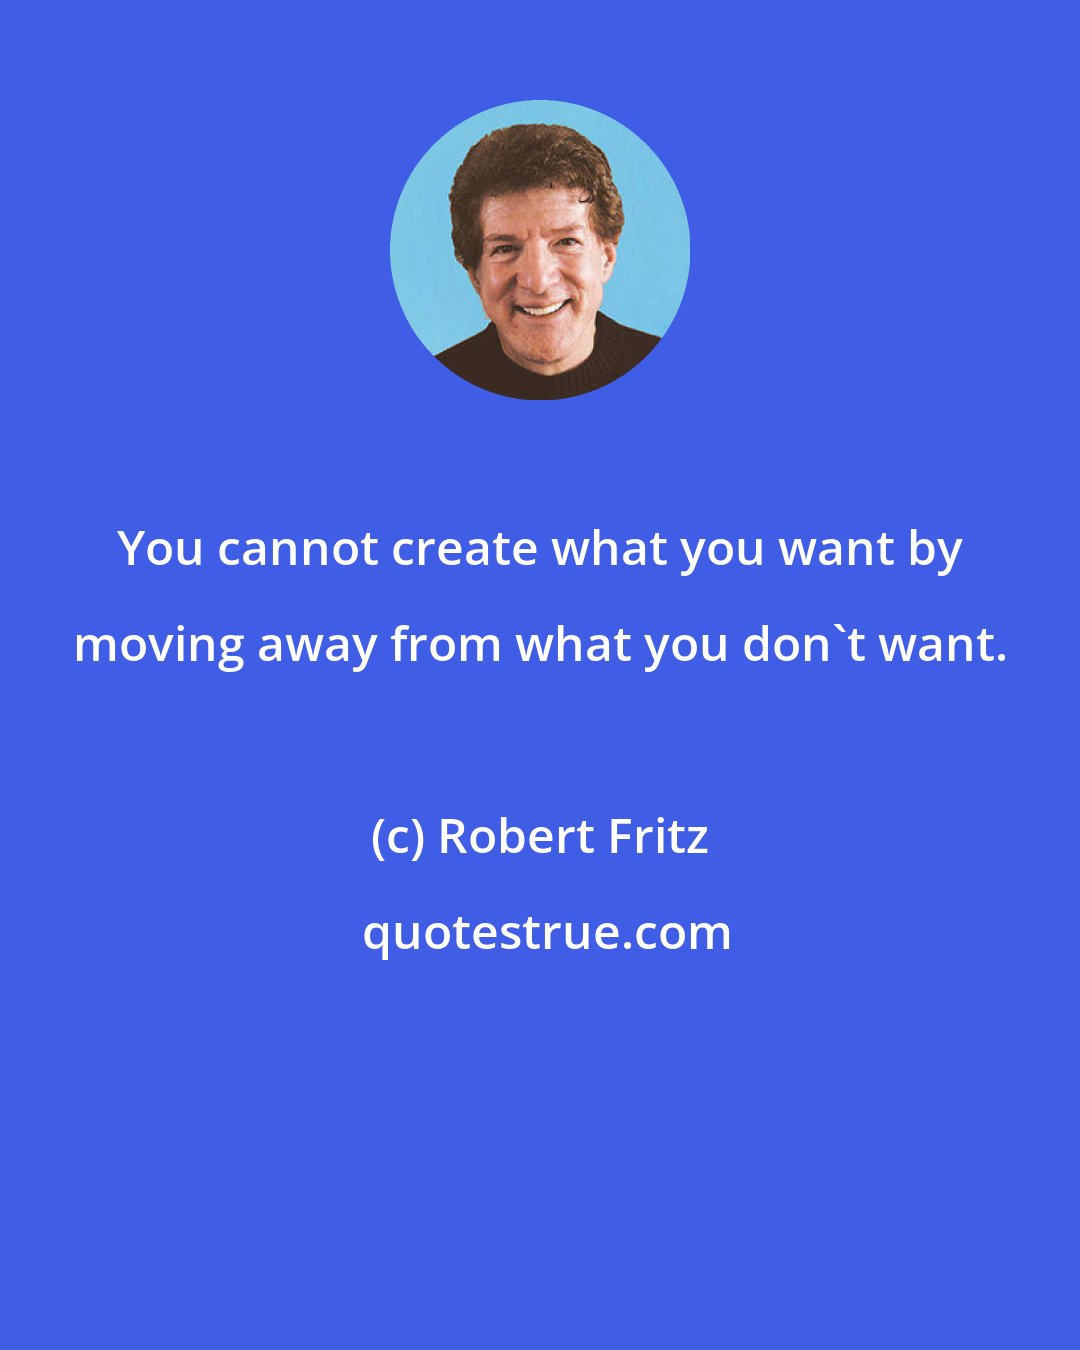 Robert Fritz: You cannot create what you want by moving away from what you don't want.